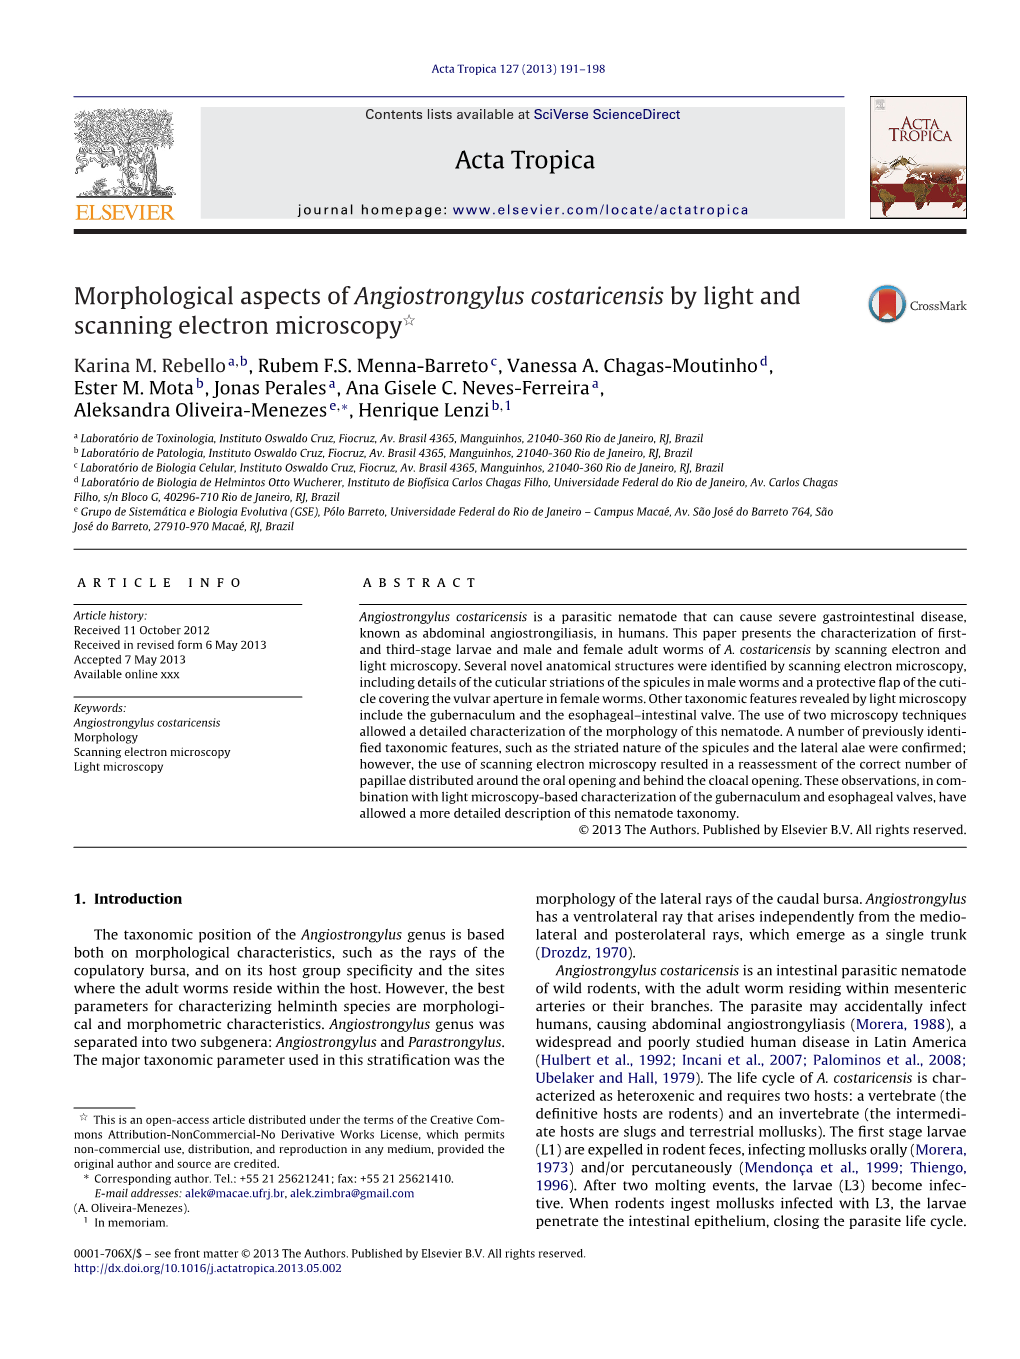 Morphological Aspects of Angiostrongylus Costaricensis by Light And